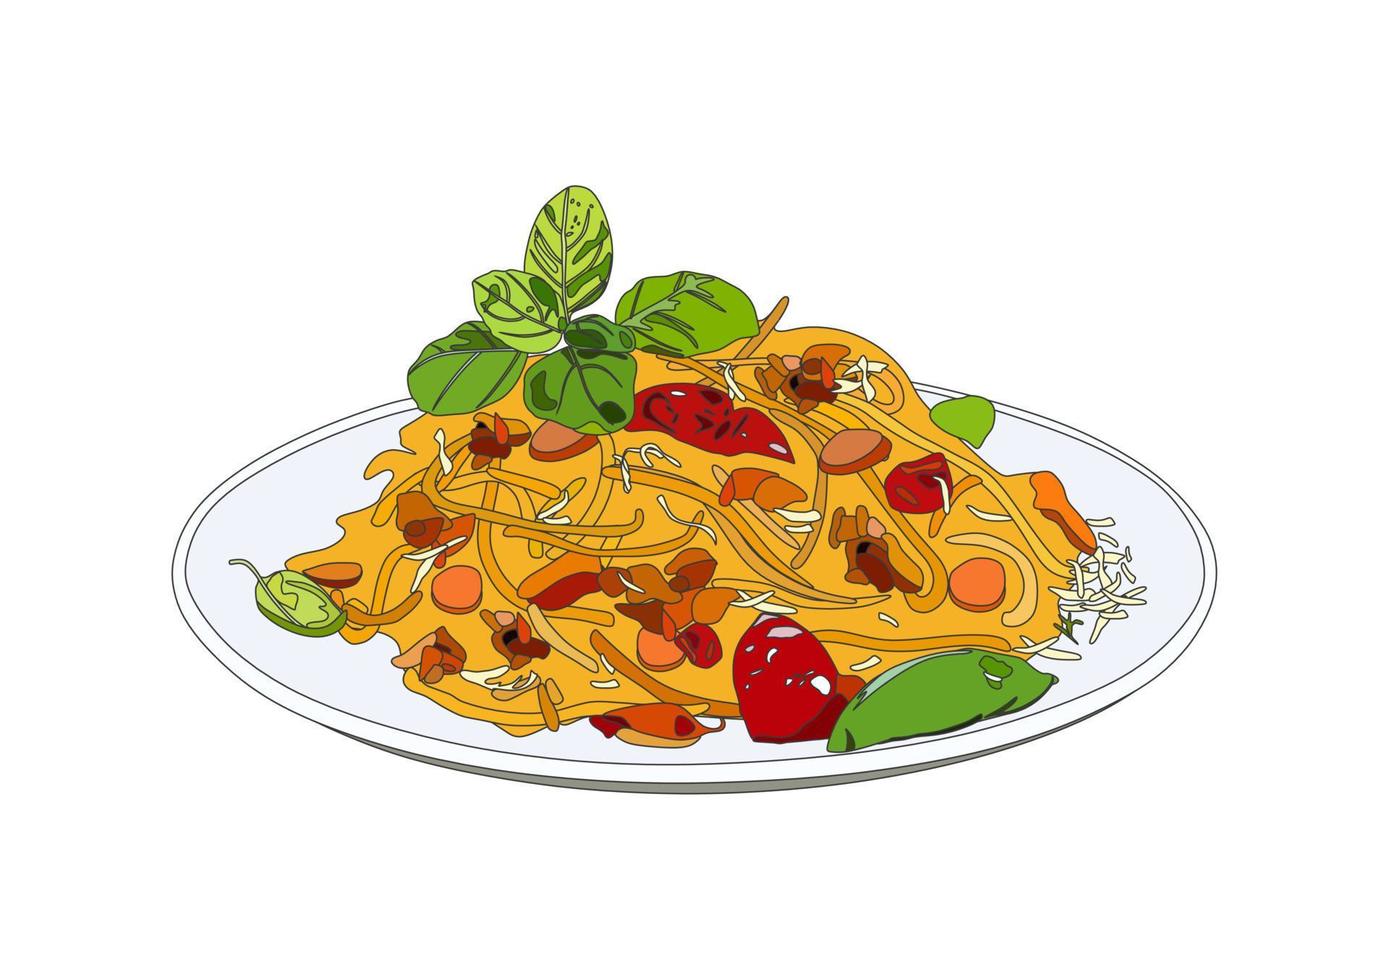 Italian pasta noodles with tomato, meat, cheese and basil. Italian noodles food recipes. Vegan pasta spaghetti noodles menu close up illustration vector. vector